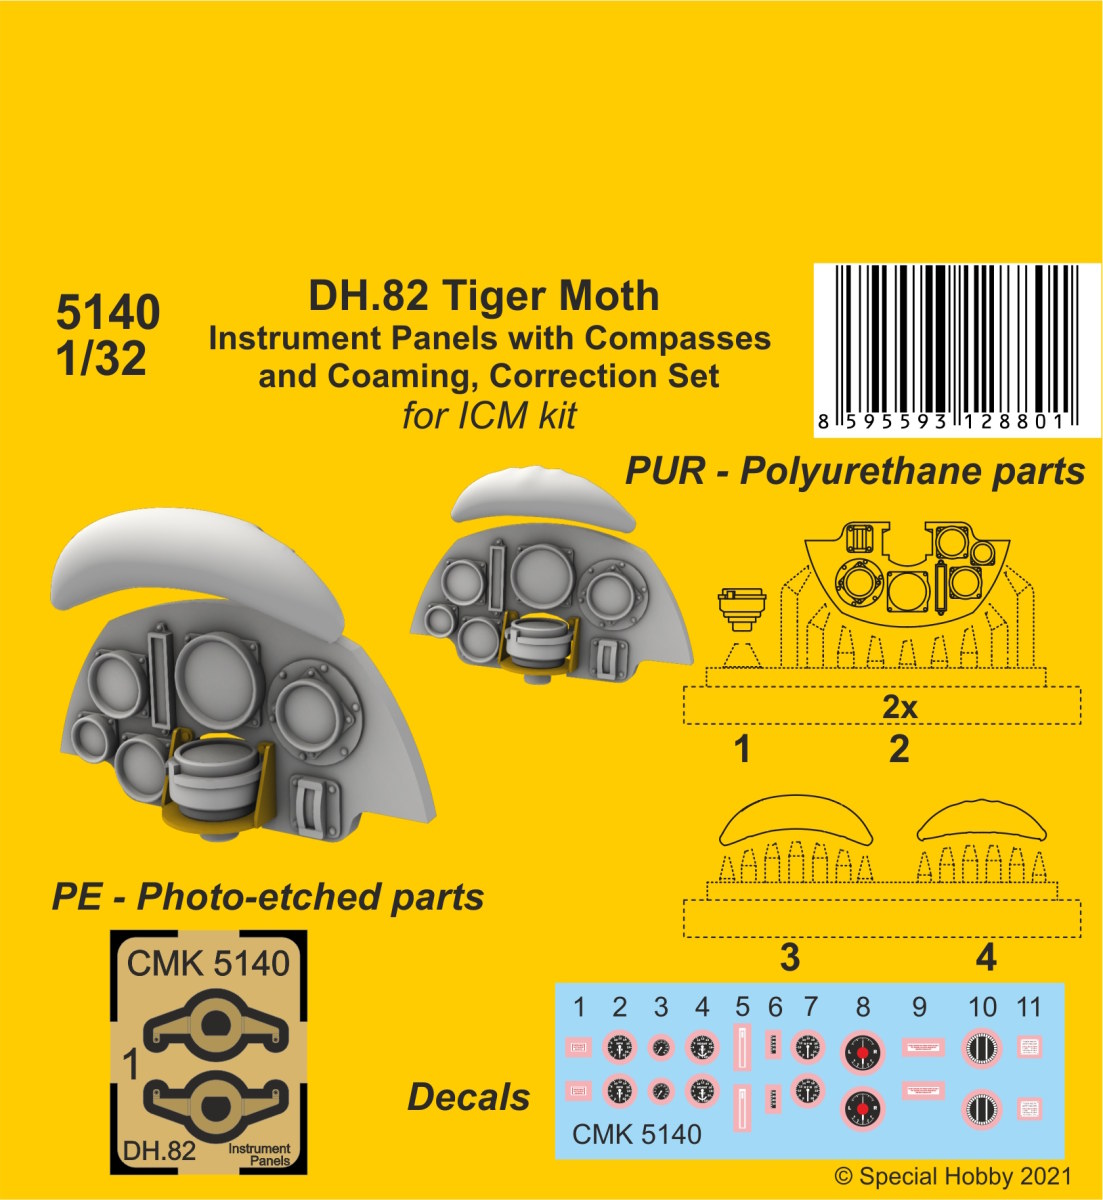 1/32 DH.82 Tiger Moth Instrument P. with Compasses and Coaming, Correction S. (ICM kit)